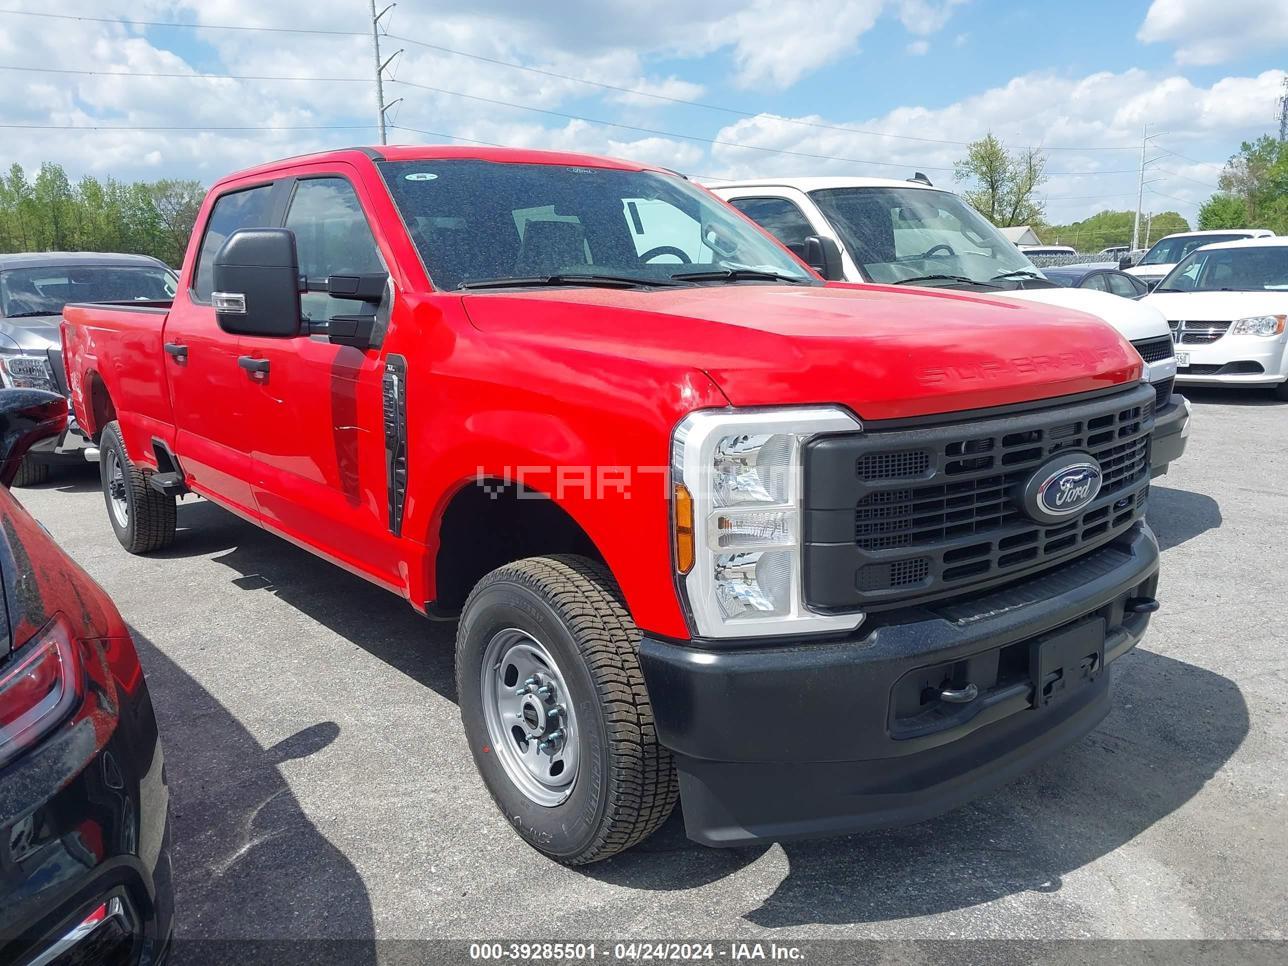 VIN: 1FT8W3BA2RED72514 - ford f350